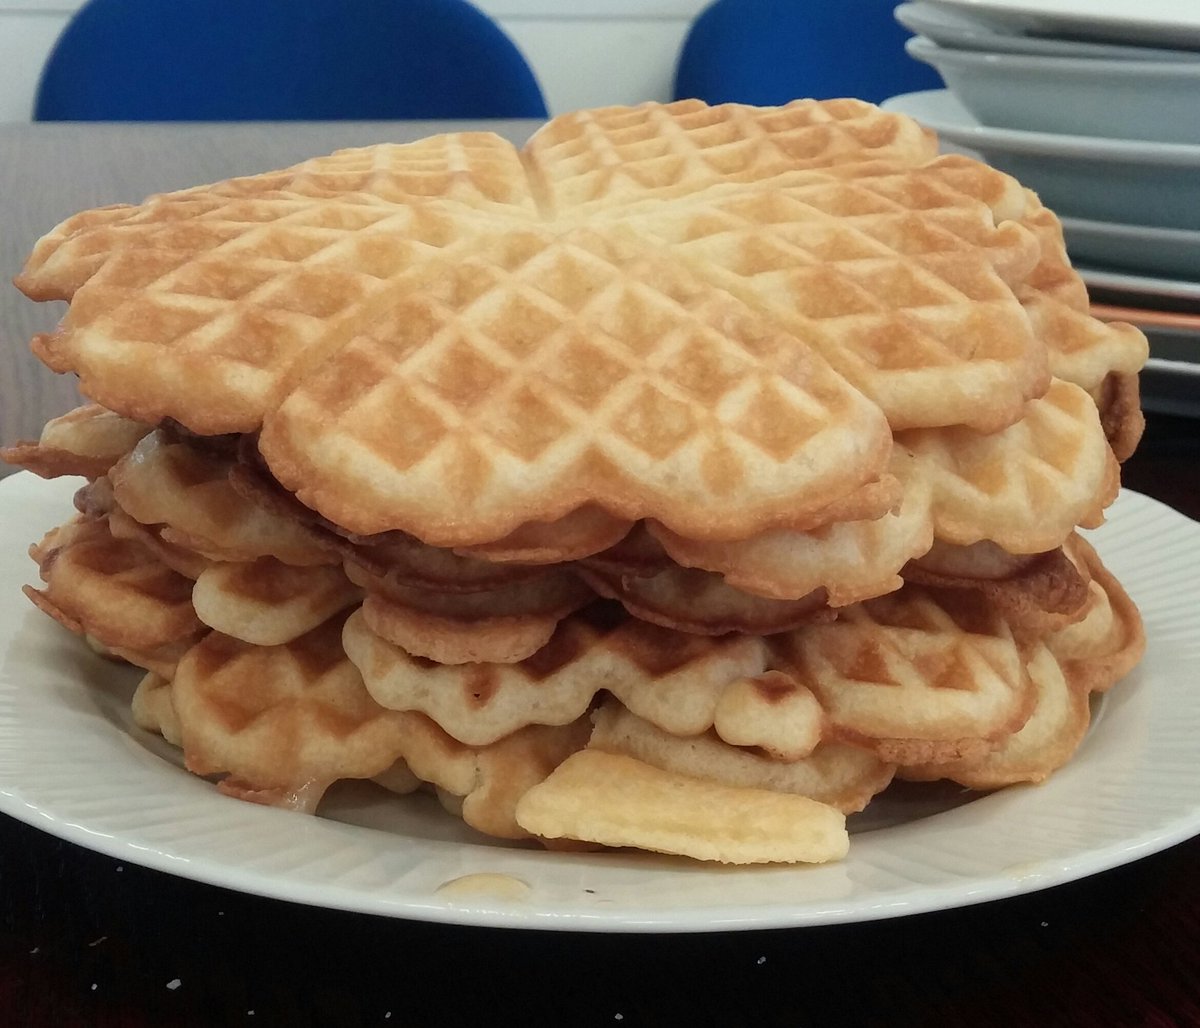 We finally introduced the waffle friday. Thanks to @PeterMWald and his lectures, the offboarding event today was THE highlight of the whole month. I think me might do that more often in the future. I love to see the employees happy :) #FeelGoodFriday #feelgoodmanager #waffle